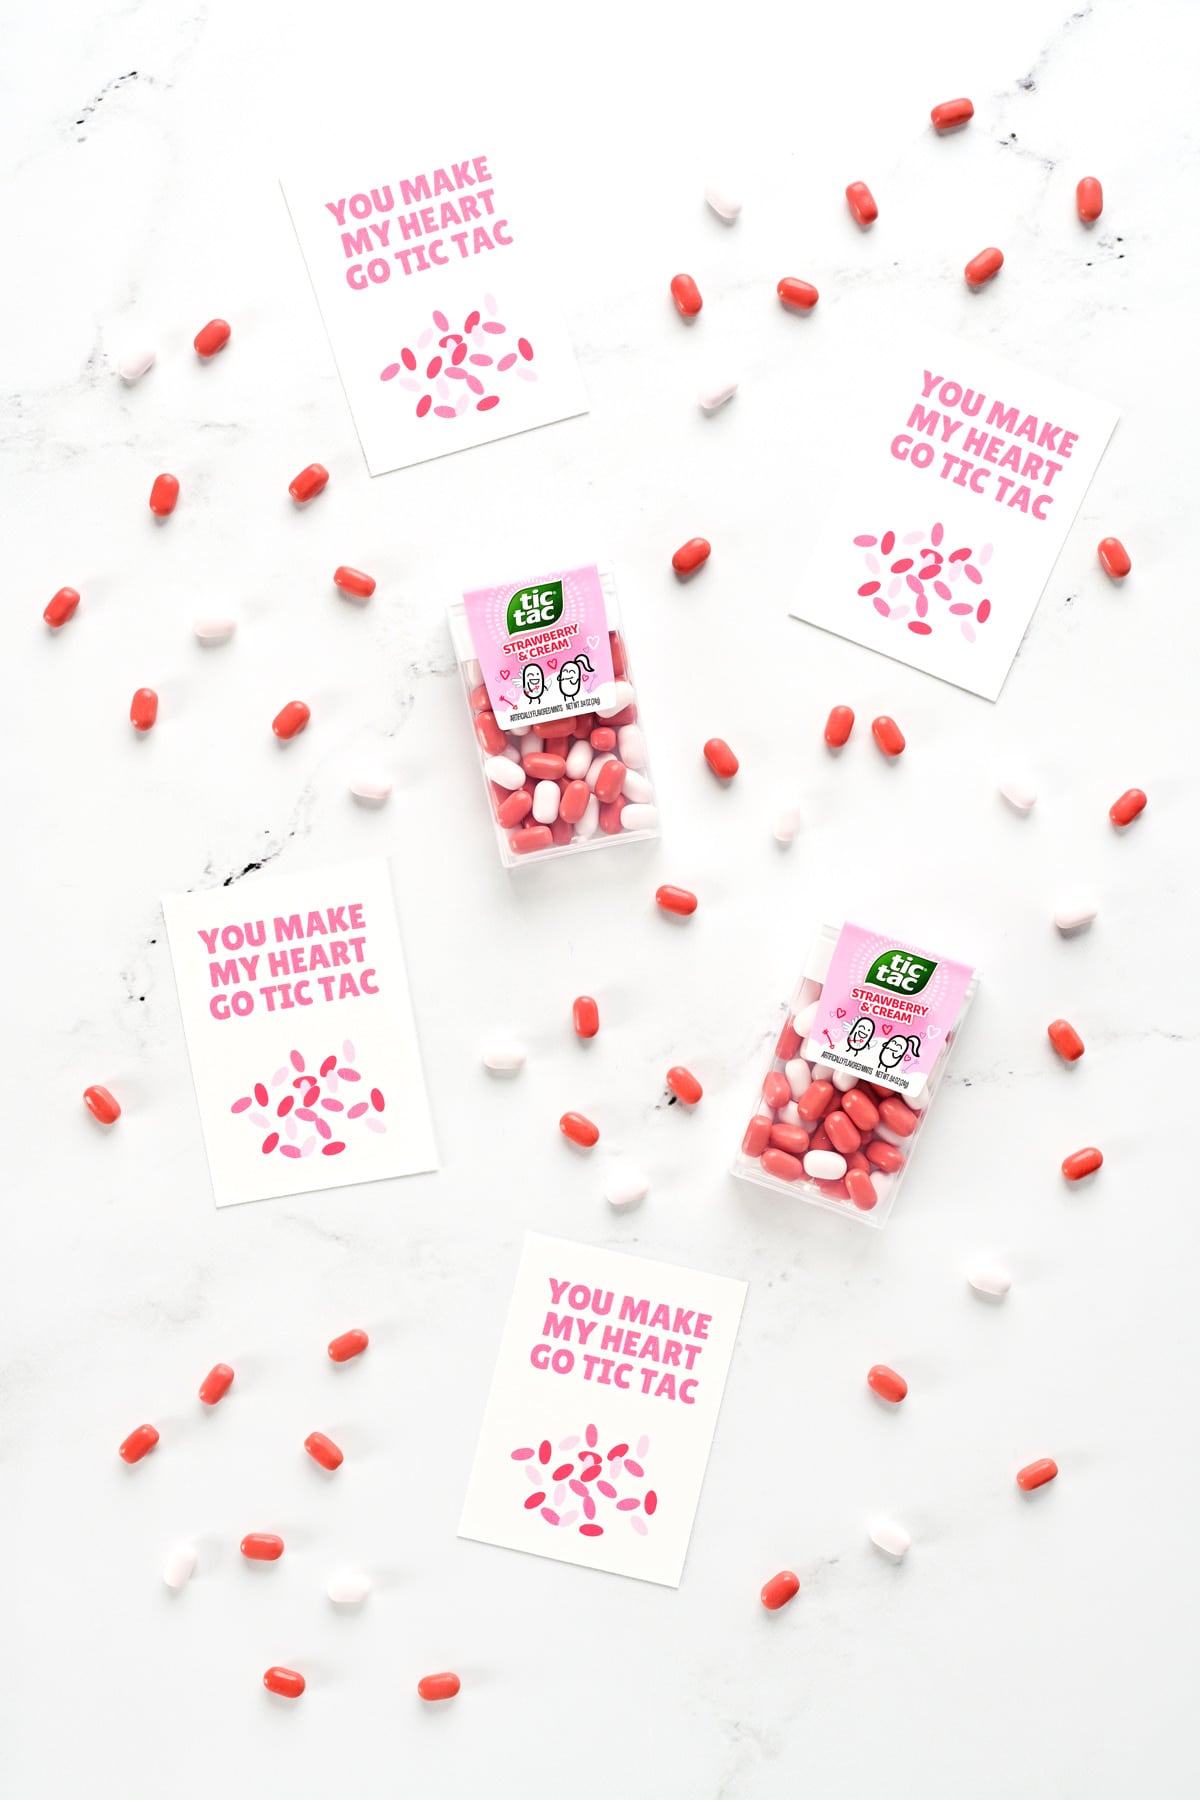 Strawberry & Cream Tic Tac candies and free printable valentines on a counter surface.